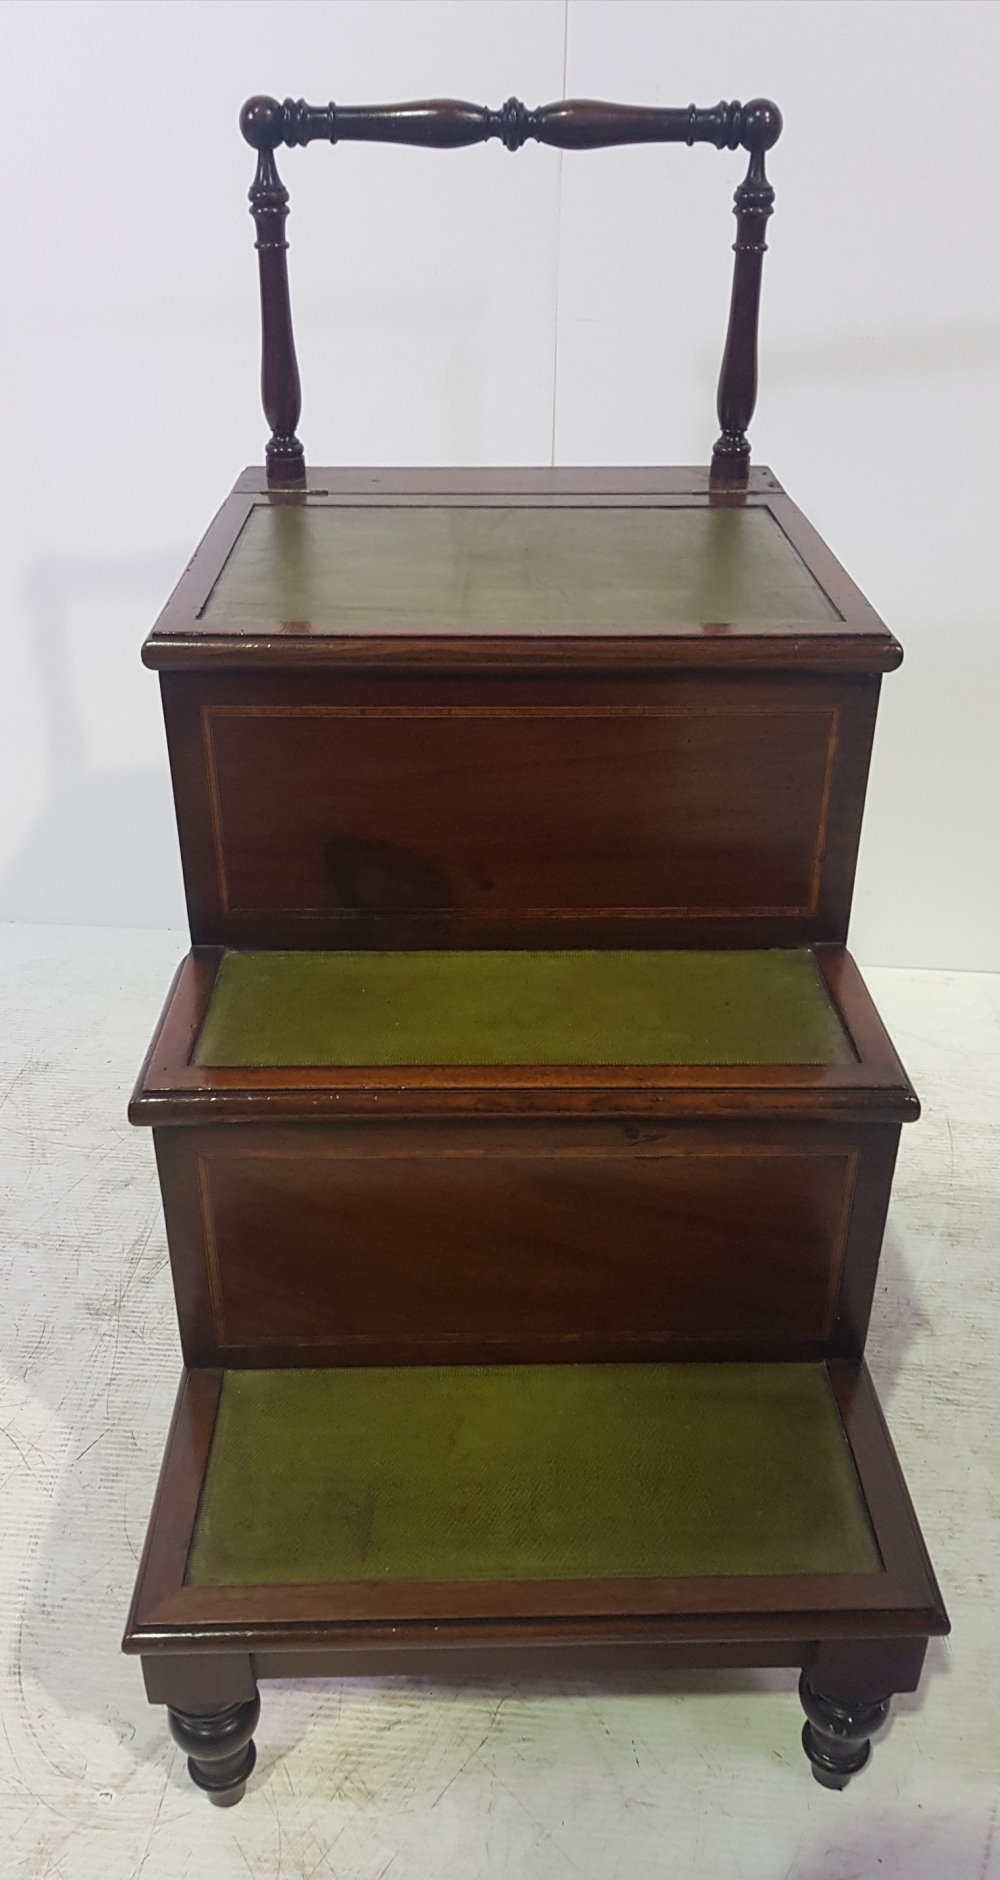 A RARE 19TH CENTURY MAHOGANY & LEATHER LIBRARY STEPS, with raised turned handle, and turned legs, - Image 3 of 4